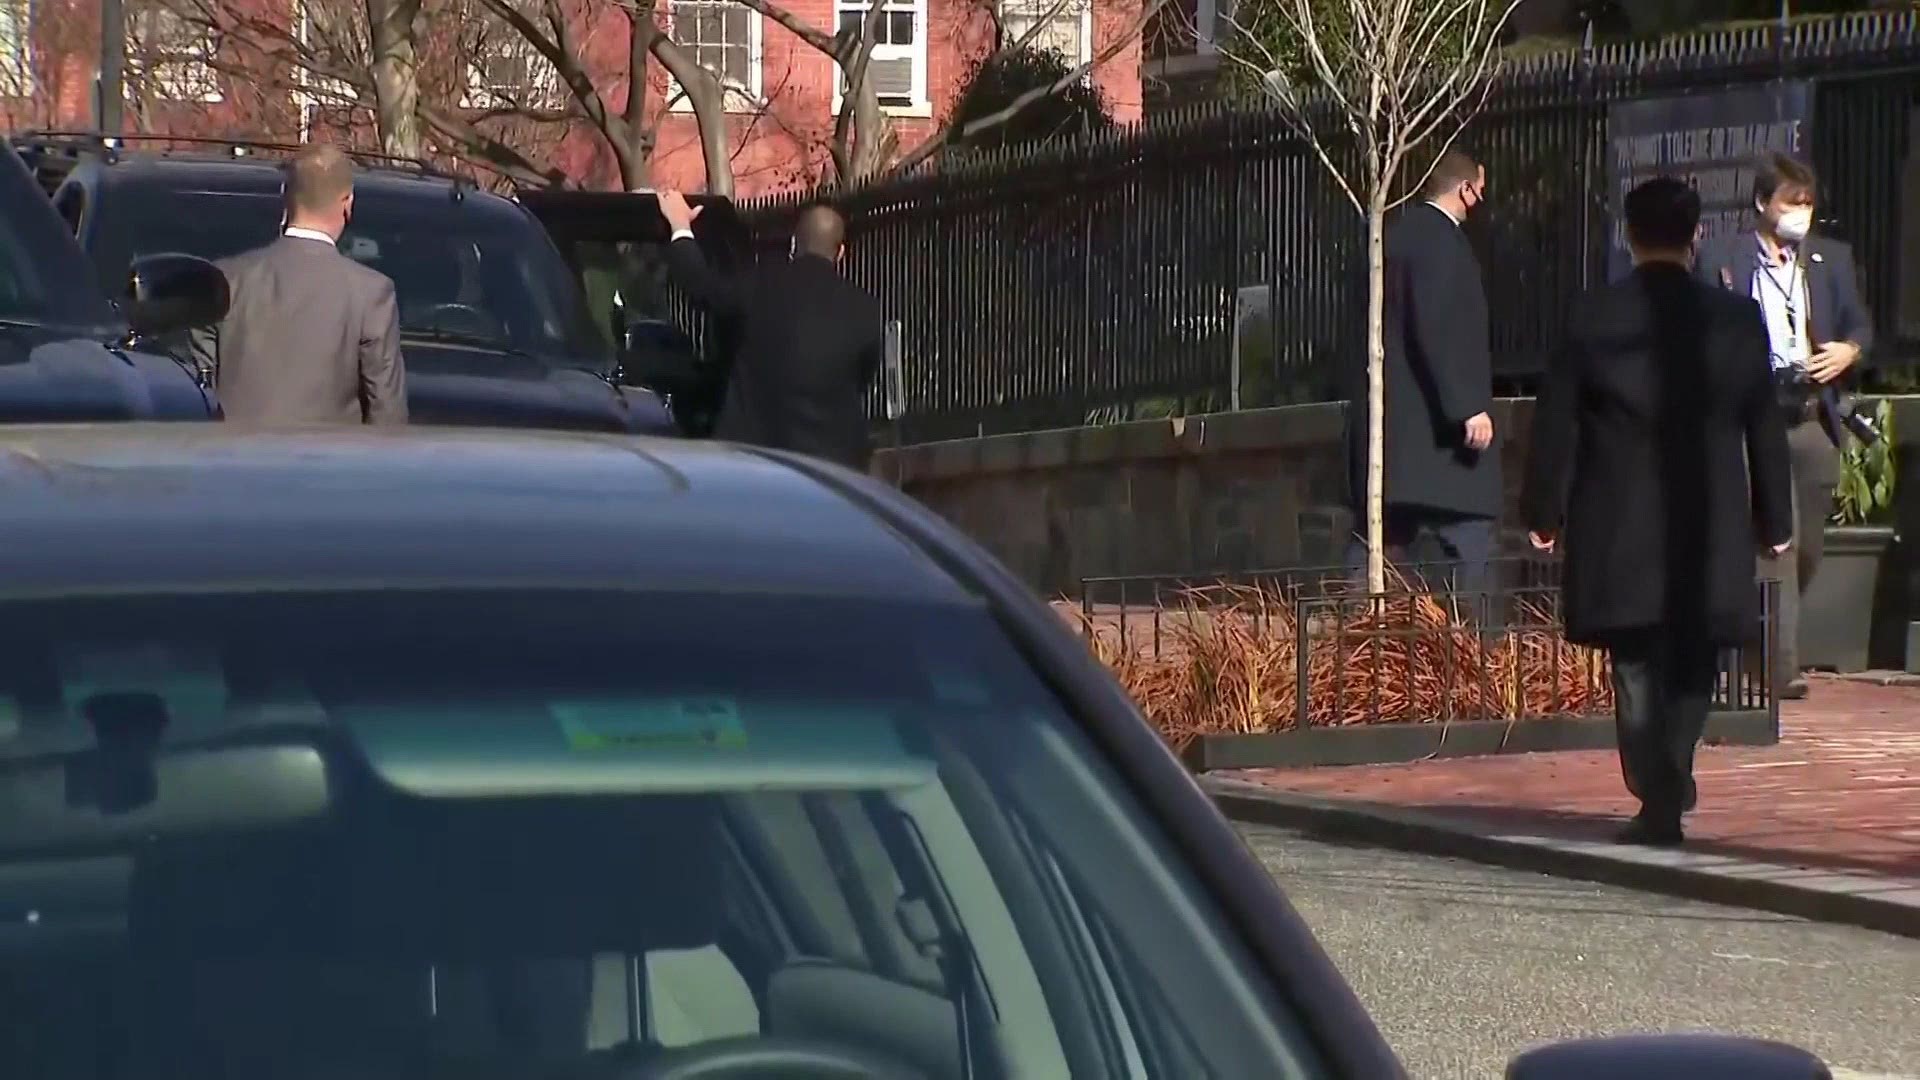 His motorcade made a brief stop on the way back to the White House for carryout from Call Your Mother, a popular deli near the church he went to on Sunday.